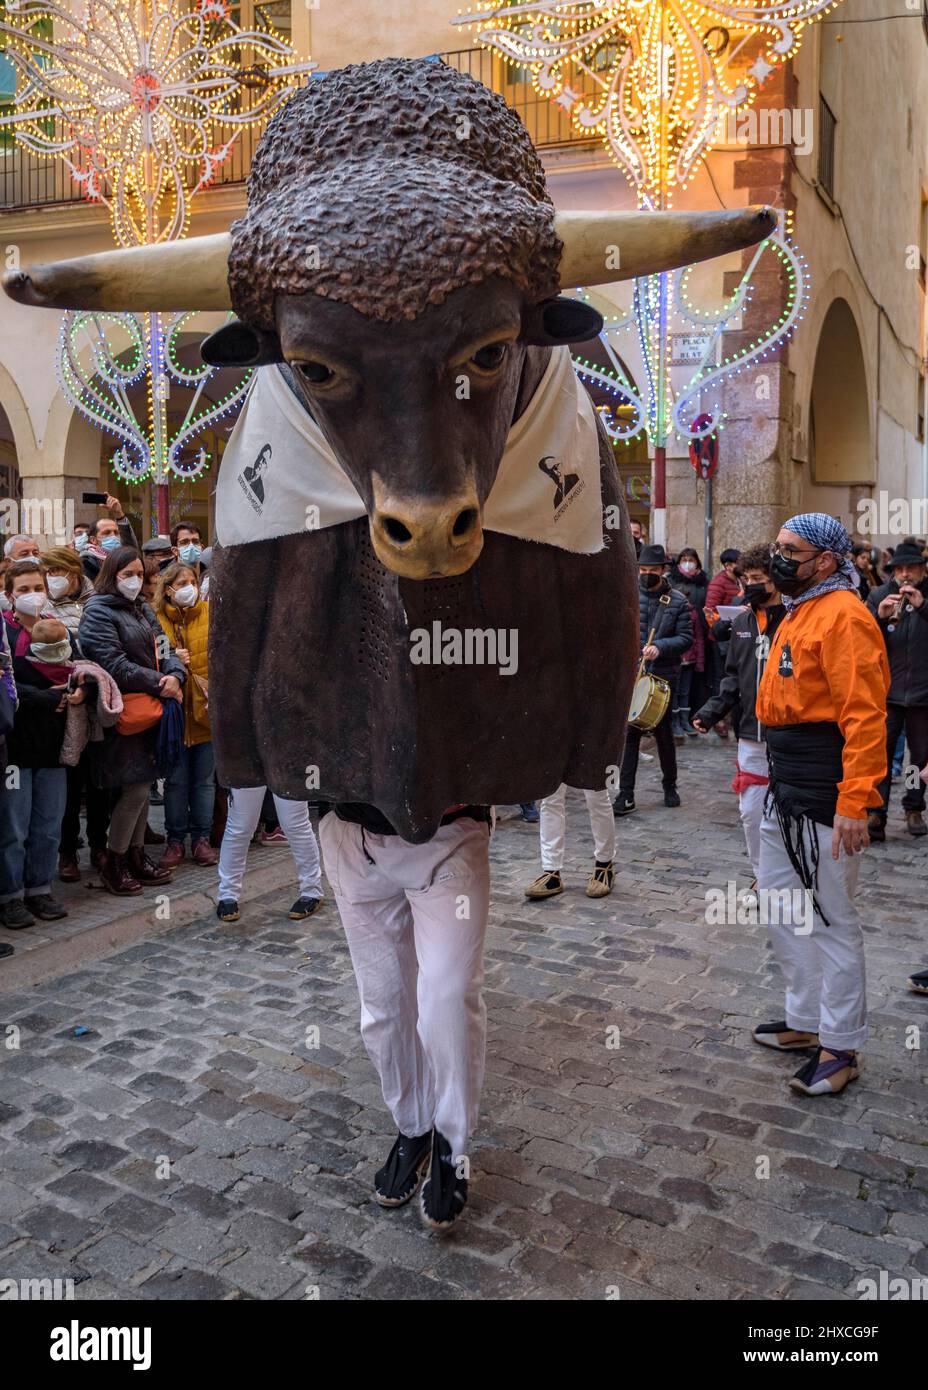 The Valls' bull in the Procession of the 2022 Valls Decennial Festival, in honor of the Virgin of the Candlemas in Valls (Tarragona, Catalonia, Spain) Stock Photo